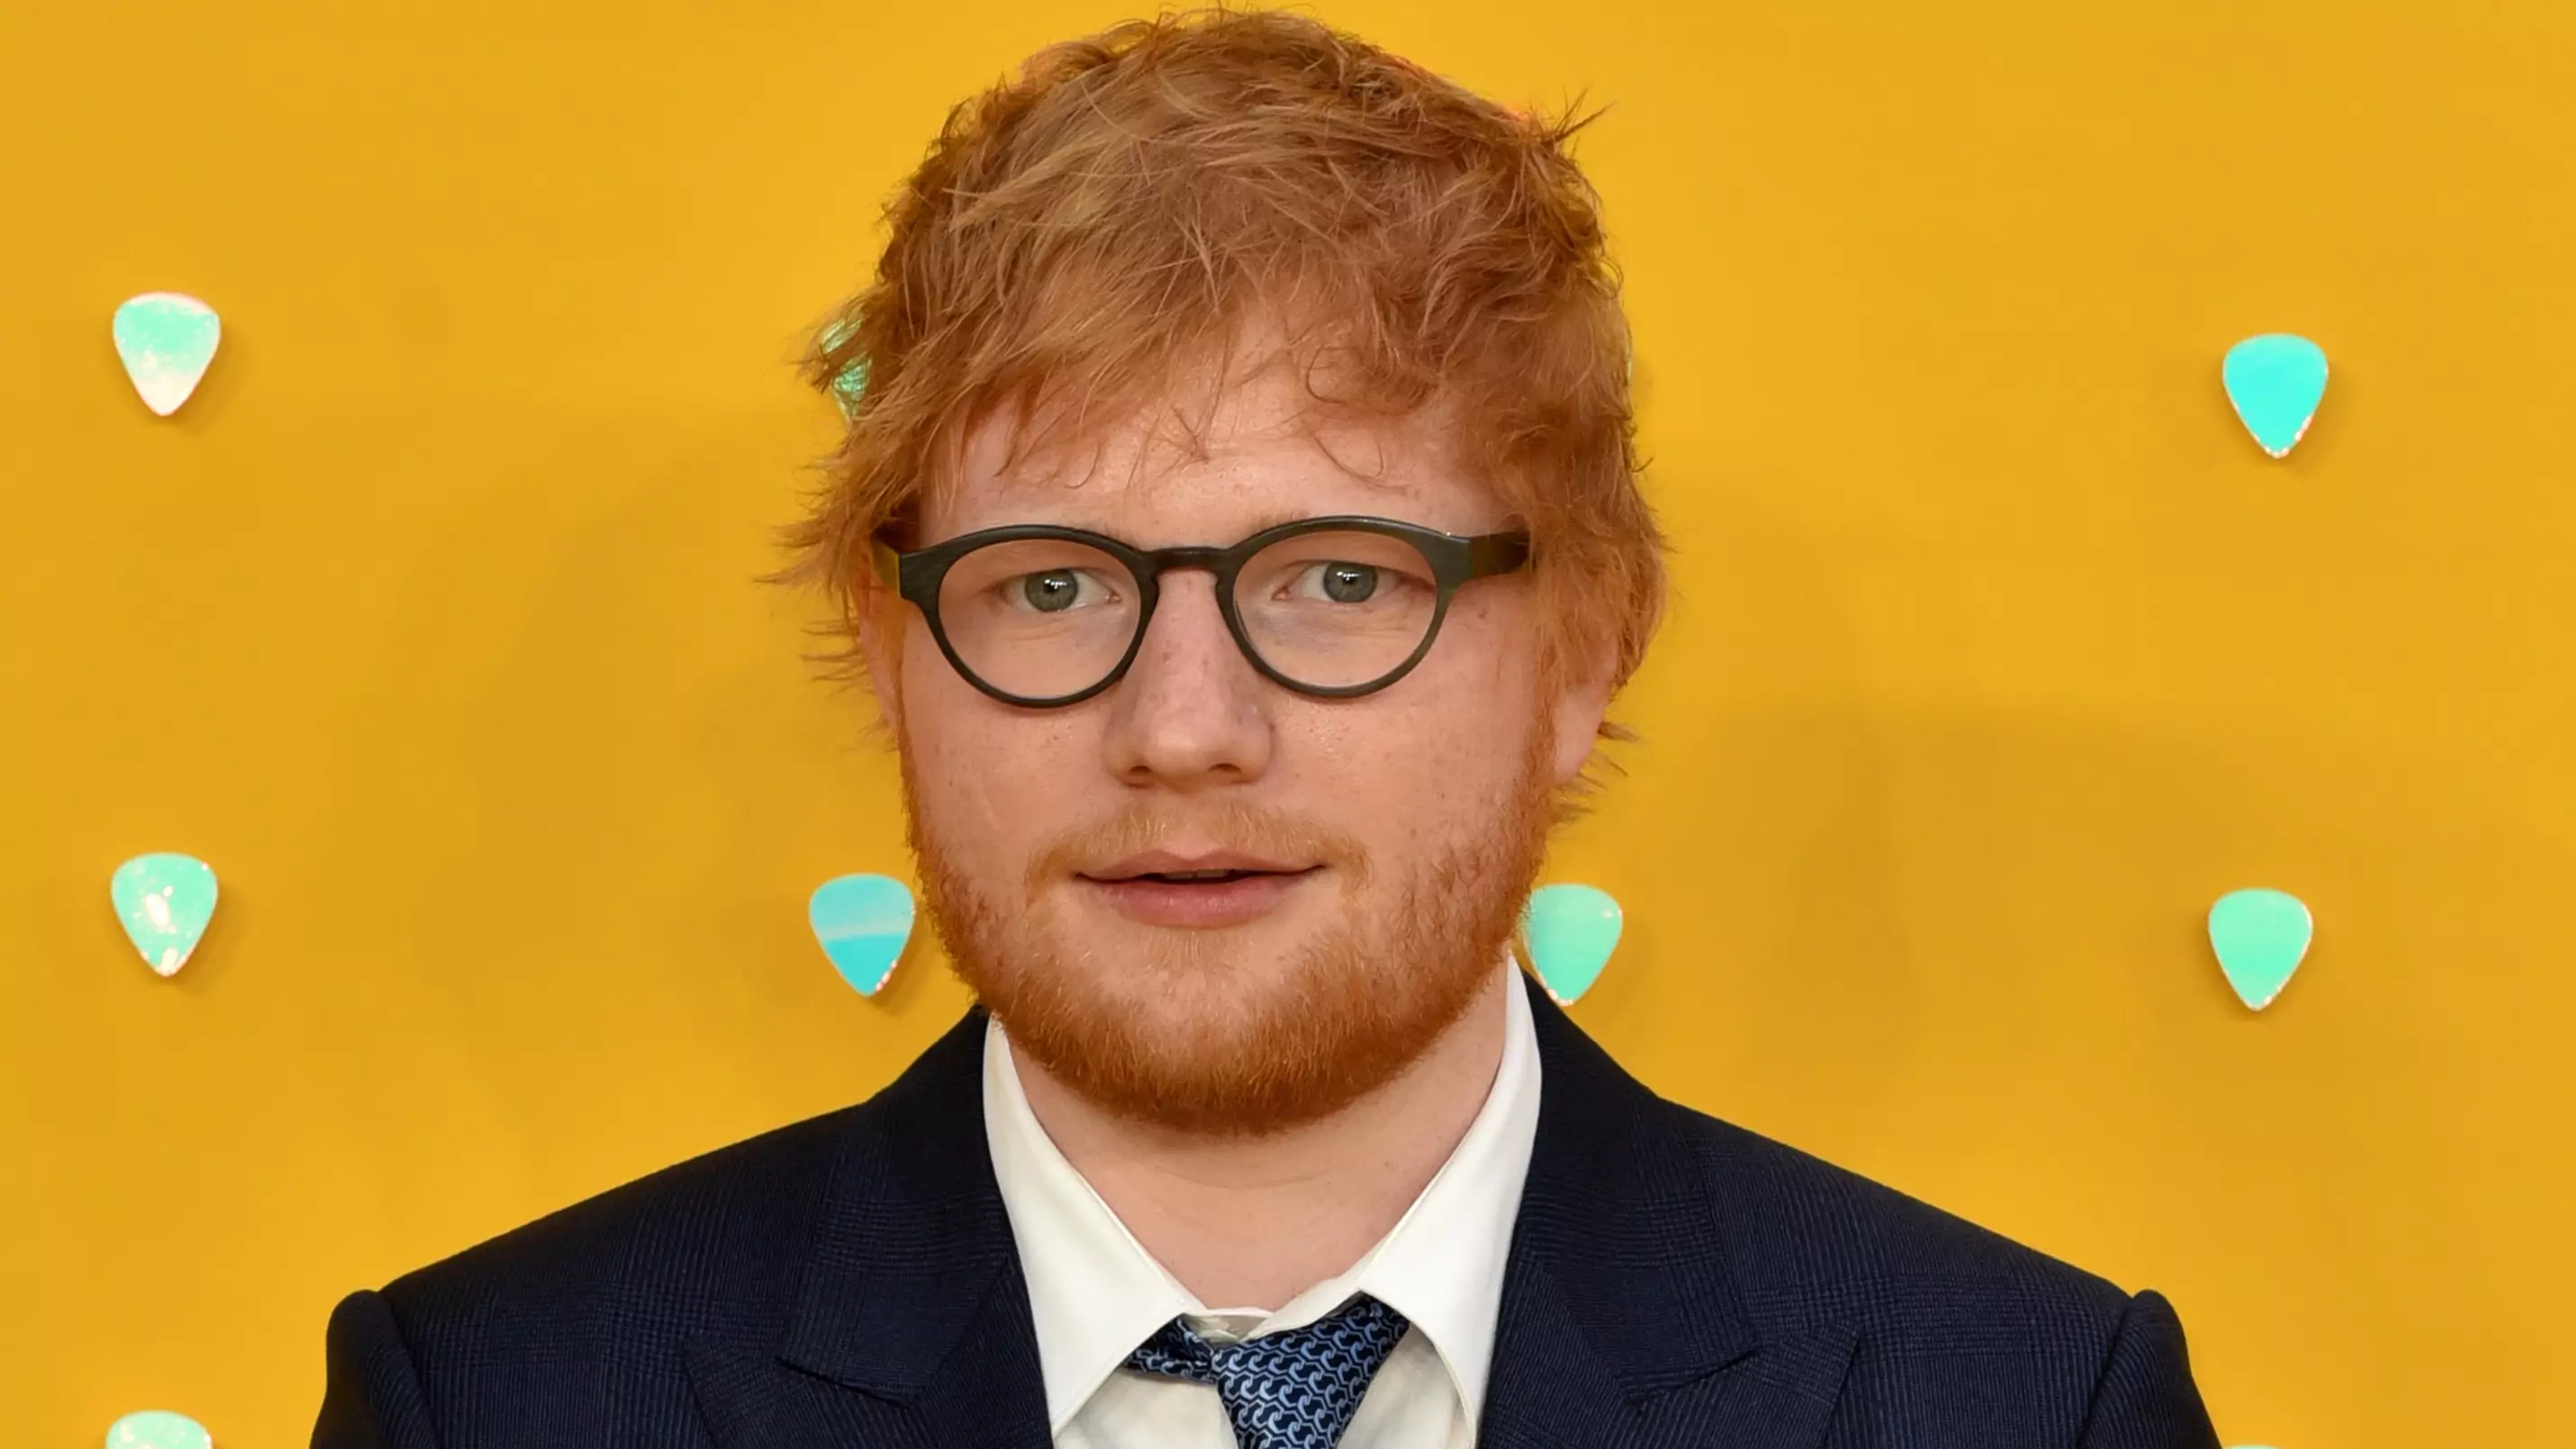 Ed Sheeran Pays For Teacher's Music Course To Help Children With Learning Difficulties 